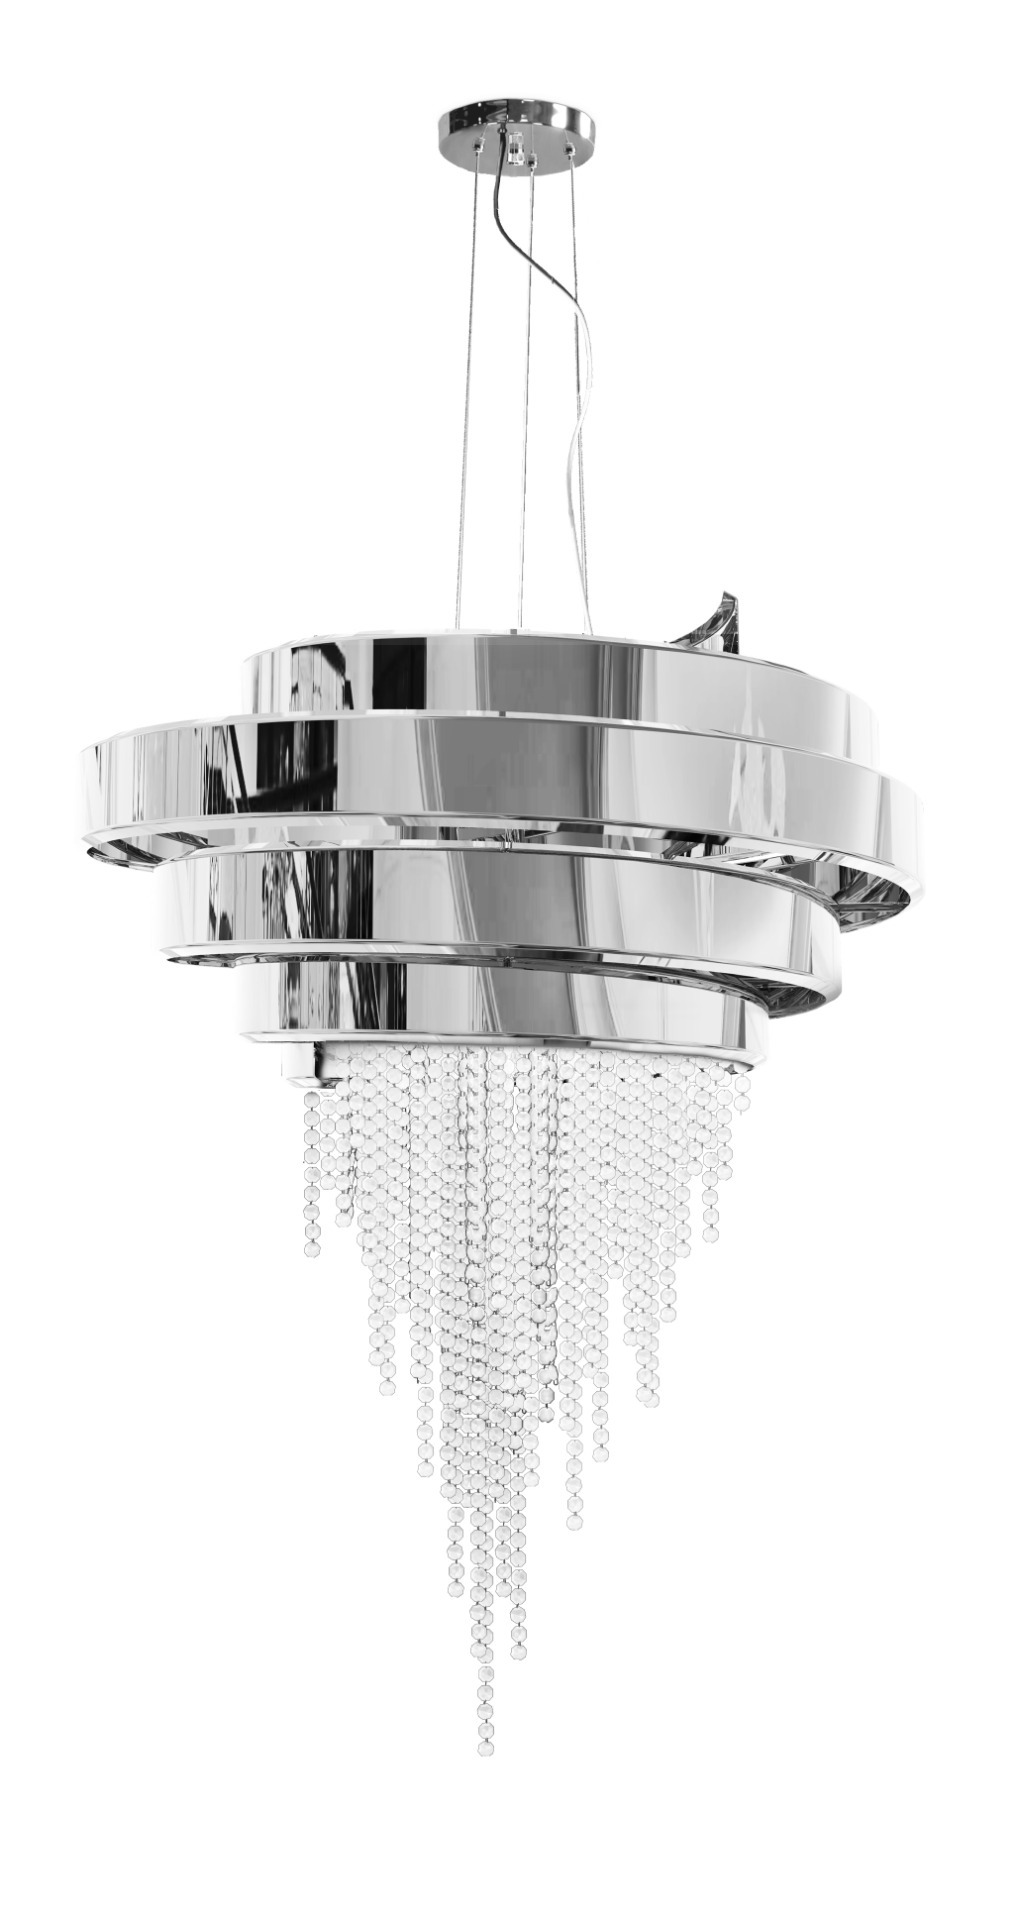 Product of the week: the guggenheim chandelier